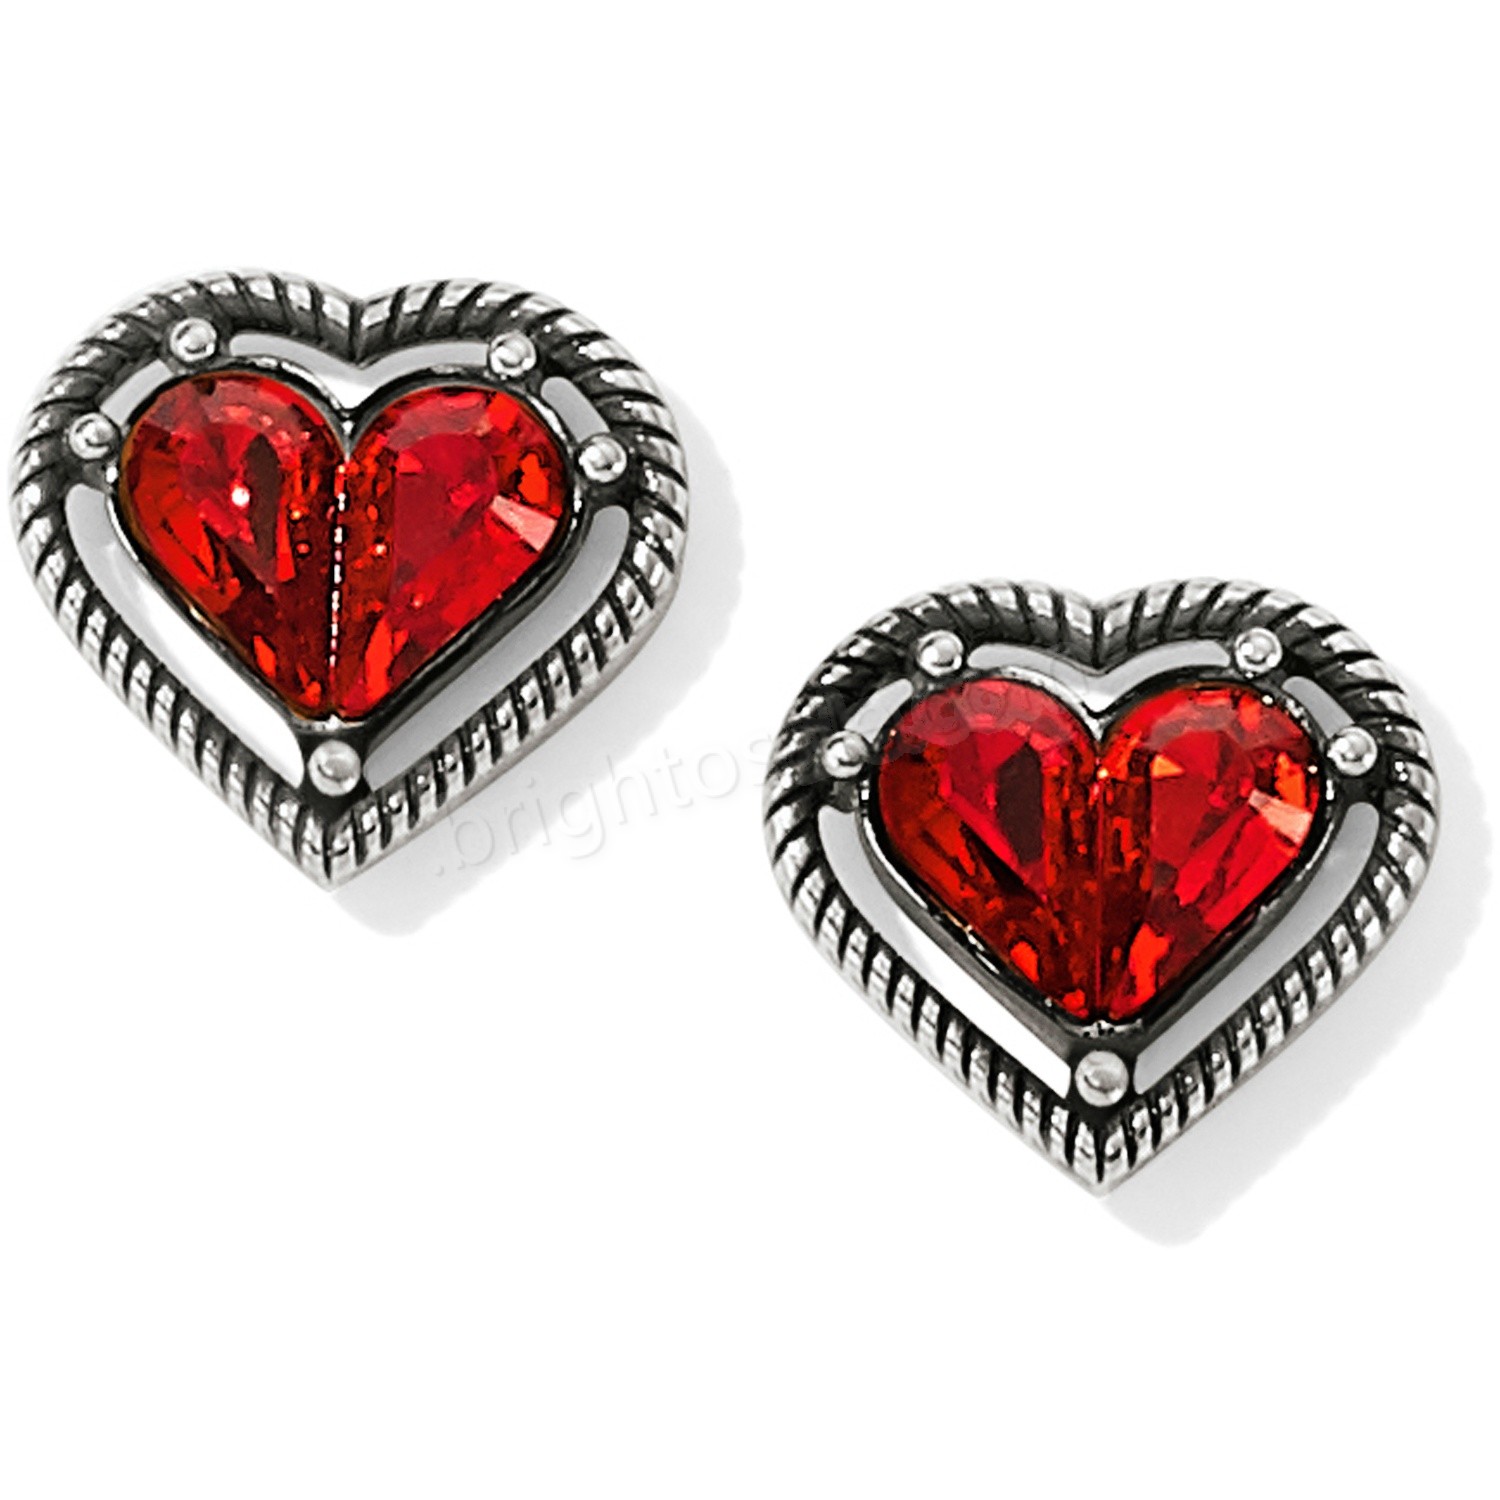 Brighton Collectibles & Online Discount One Love Petite Heart Post Earrings - Brighton Collectibles & Online Discount One Love Petite Heart Post Earrings